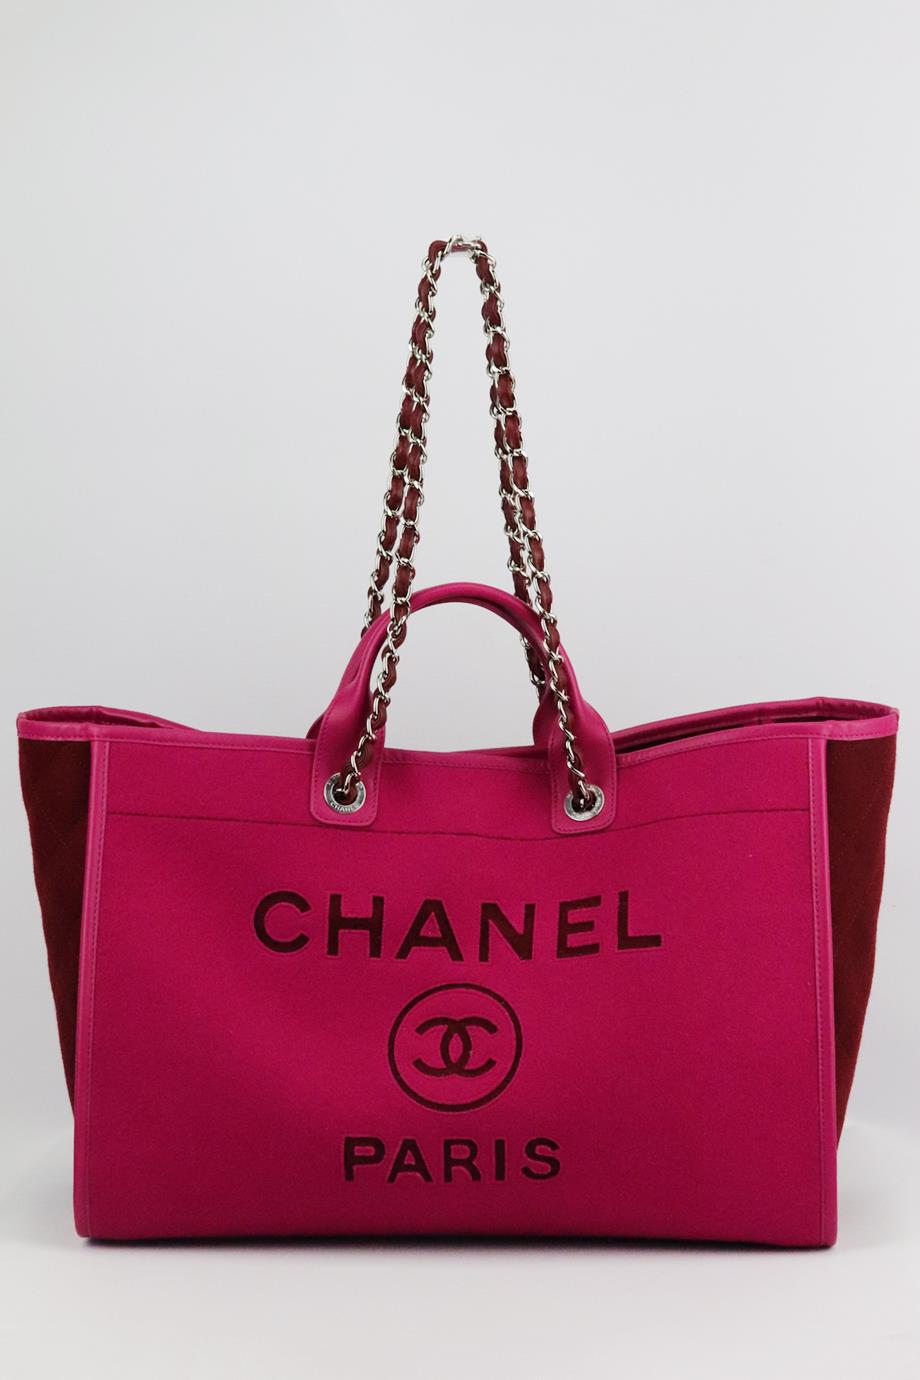 The Complete Guide to the Chanel Deauville Tote Bag  Handbagholic